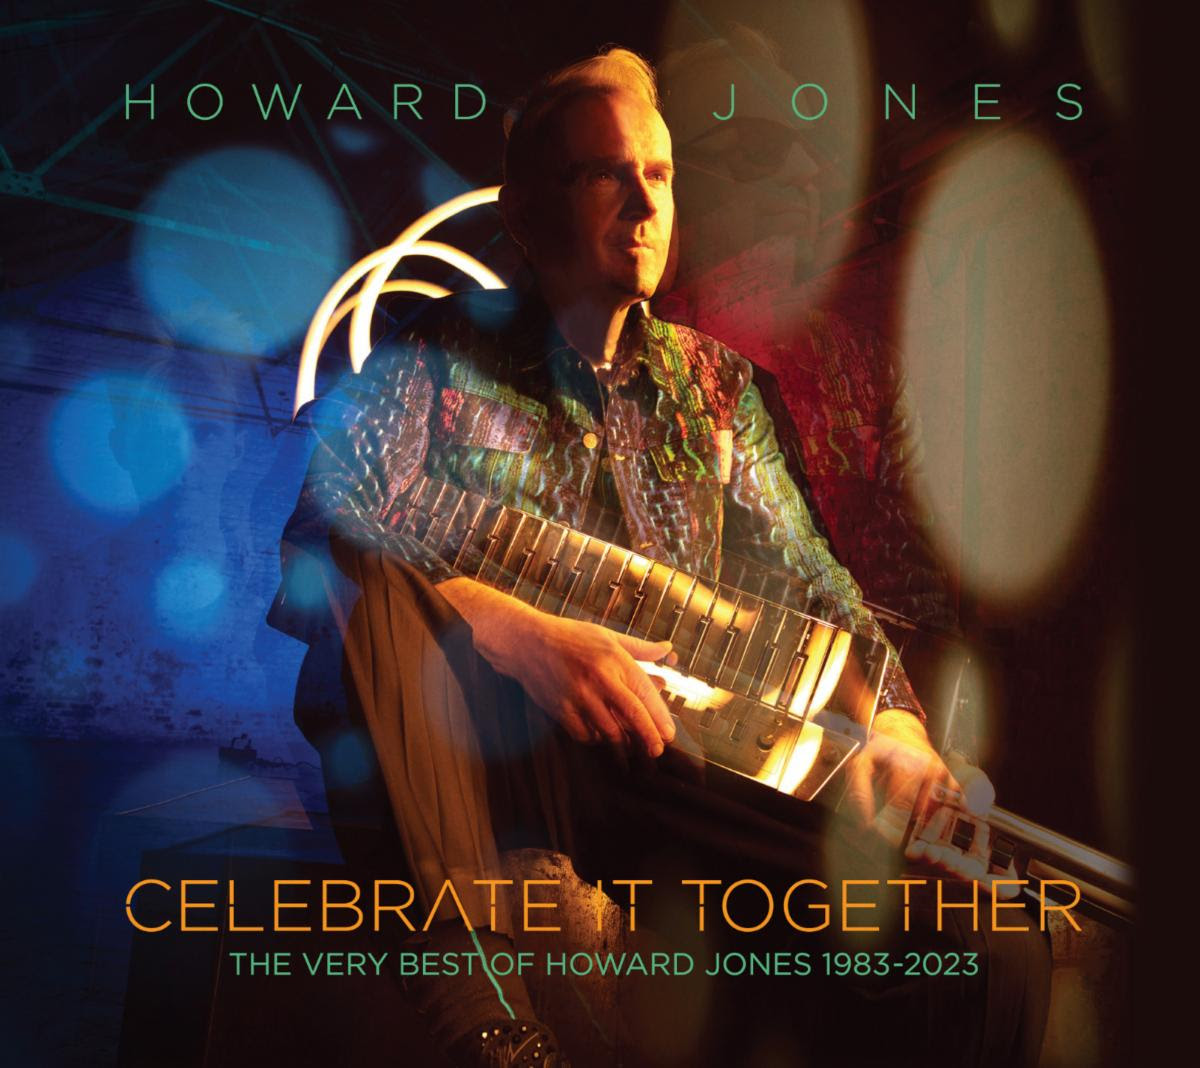 Howard Jones, `Celebrate It Together: The Very Best of Howard Jones 1983-2023,` image courtesy of Wolfson Entertainment.